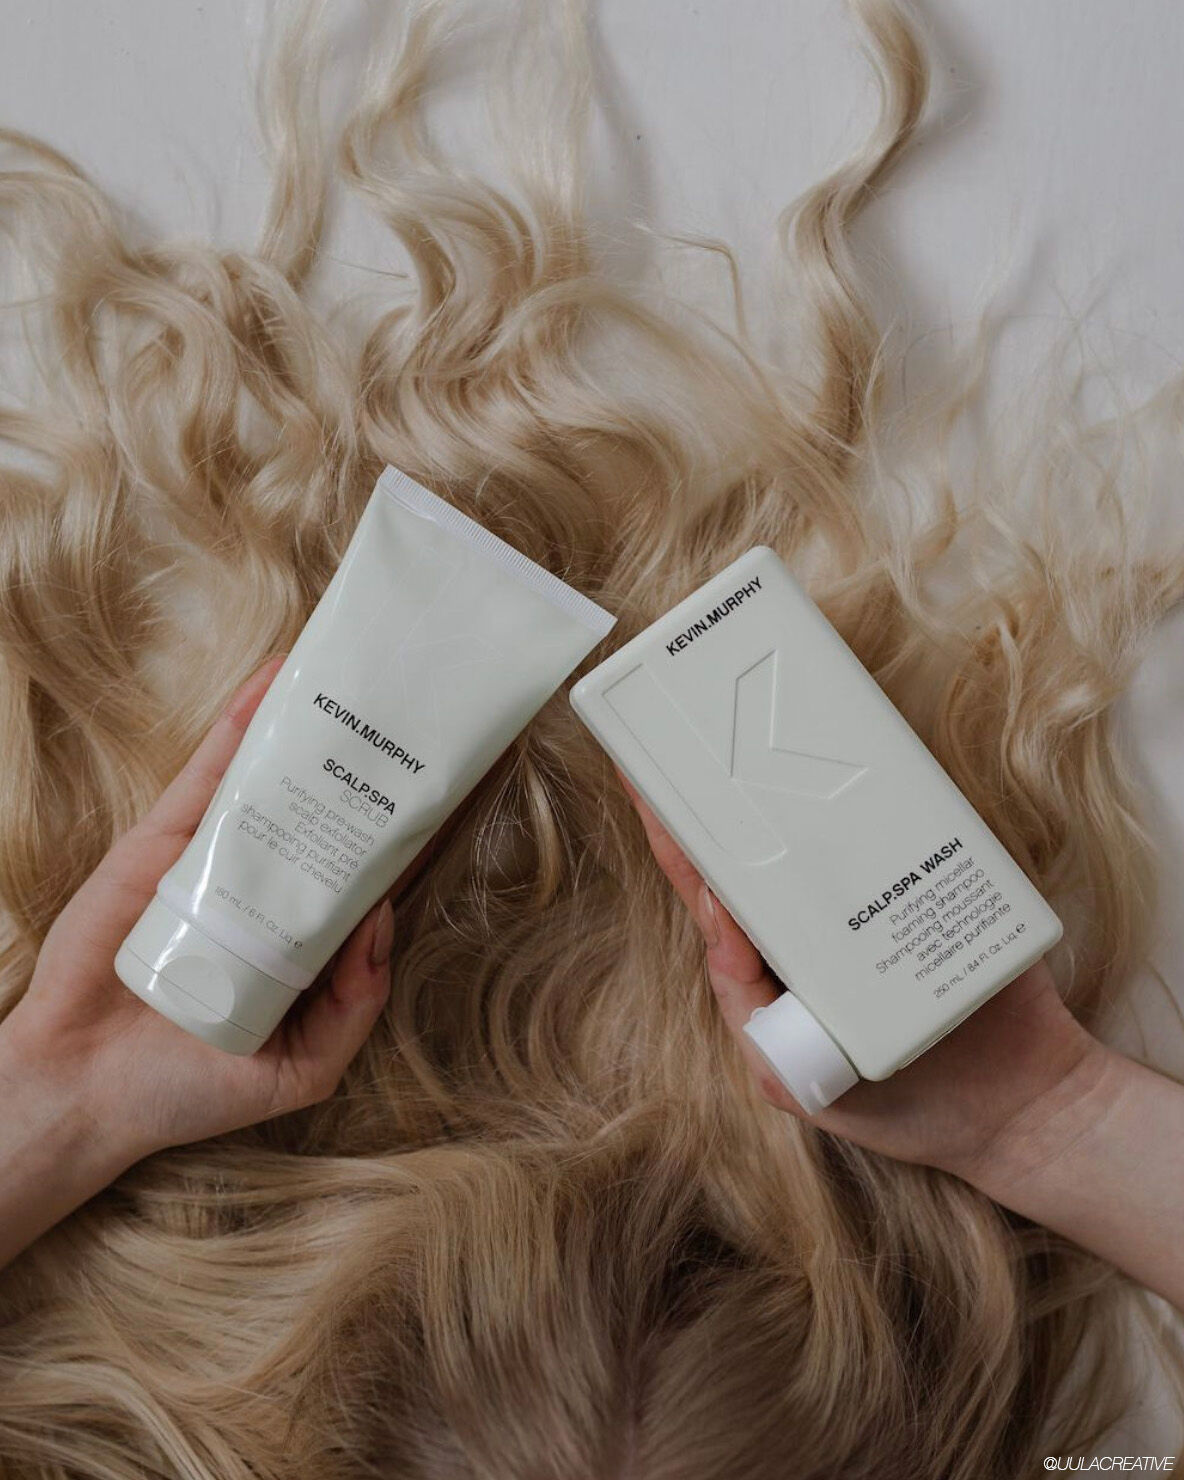 Two bottles of Kevin Murphy scalp care products held over a background of wavy blonde hair.